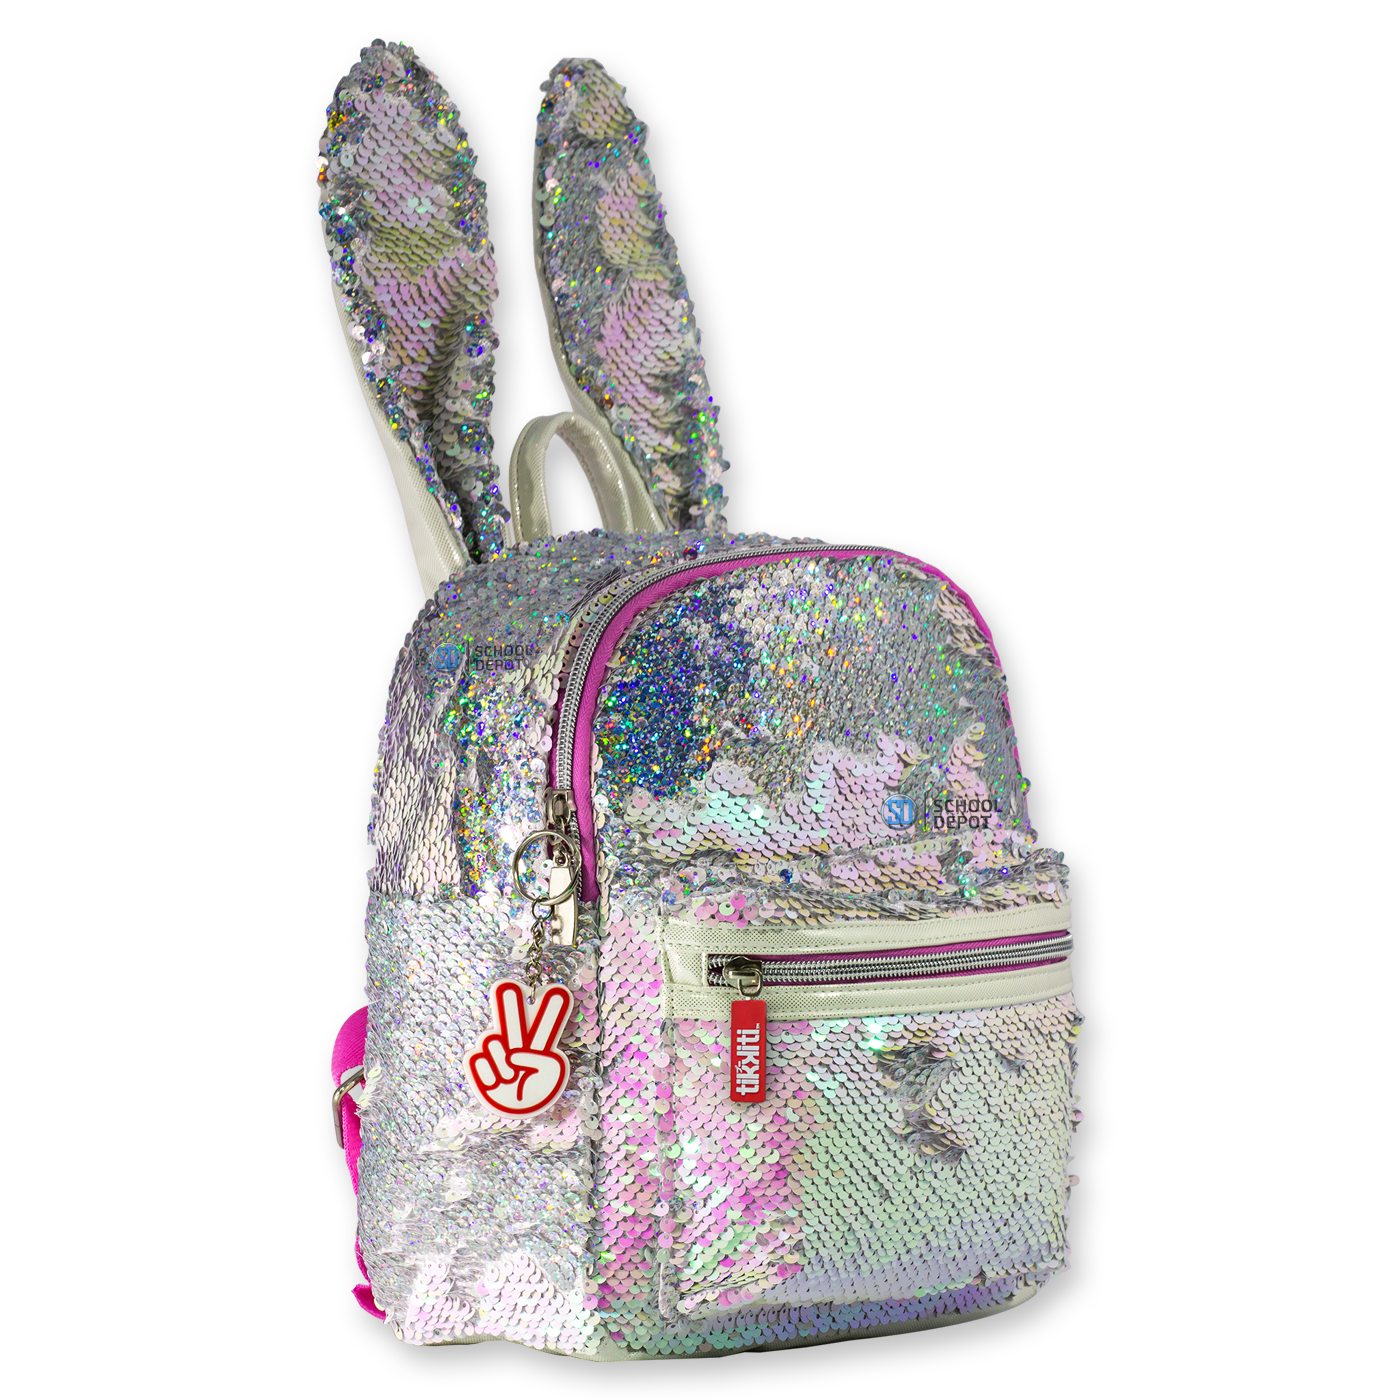 Glitter Critters Catch Me! Backpack Sequin Bunny